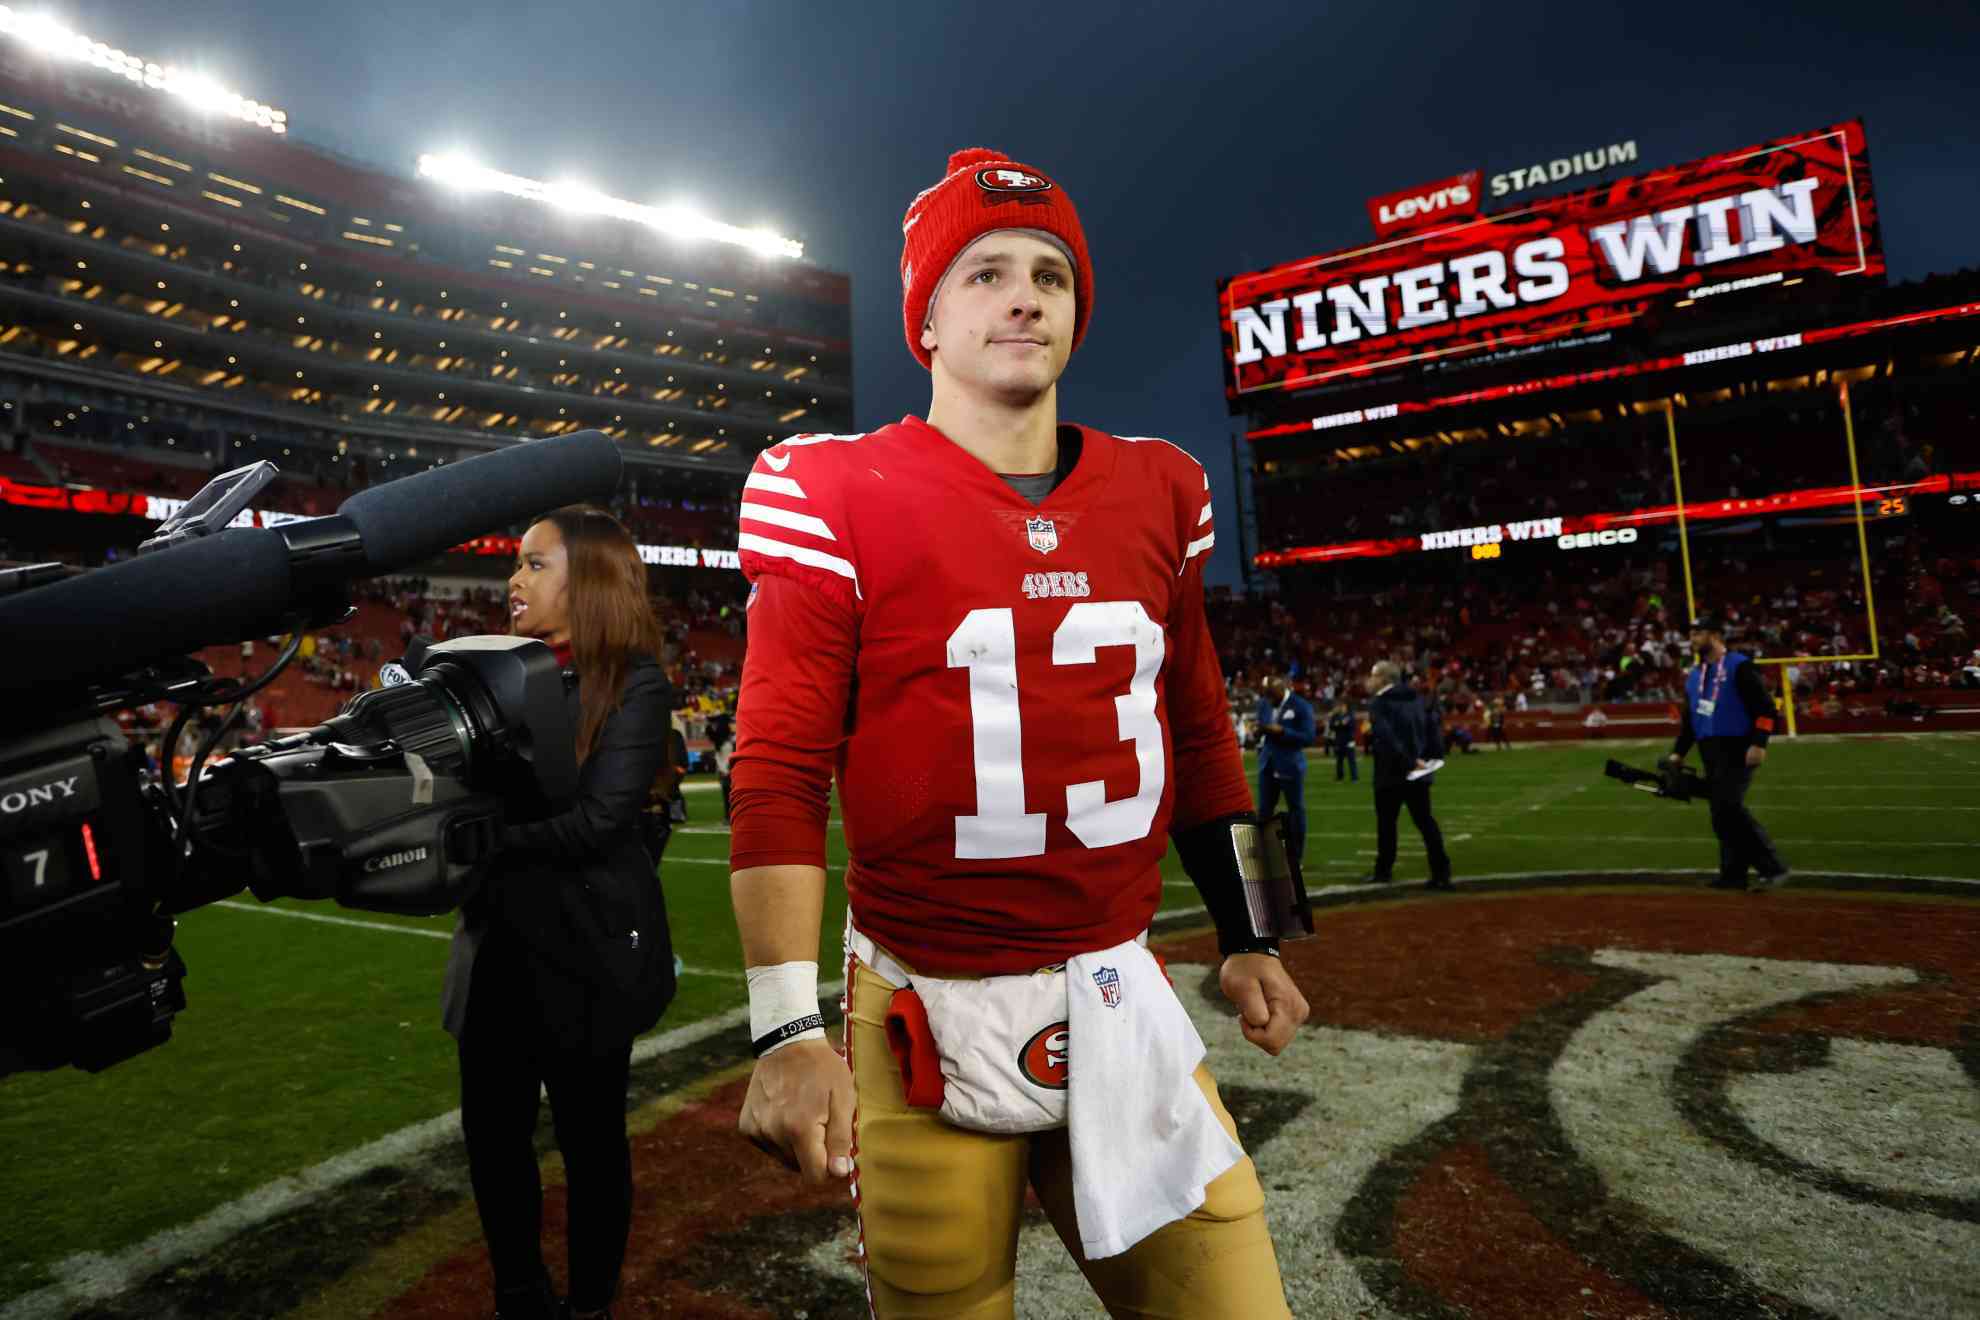 San Francisco 49ers rookie quarterback Brock Purdy was the last player chosen in the 2022 NFL Draft, earning him the nickname "Mr. Irrelevant." Incredibly, he has earned not only the starting job, he is only the fifth rookie to play in an NFC/AFC Championship Game and if he wins next Sunday vs. the Philadelphia Eagles, he will be the first NFL "freshman" to reach a Super Bowl.  To put this incredible story into perspective, here are the eight QBs that NFL teams chose over Purdy in the past Draft.